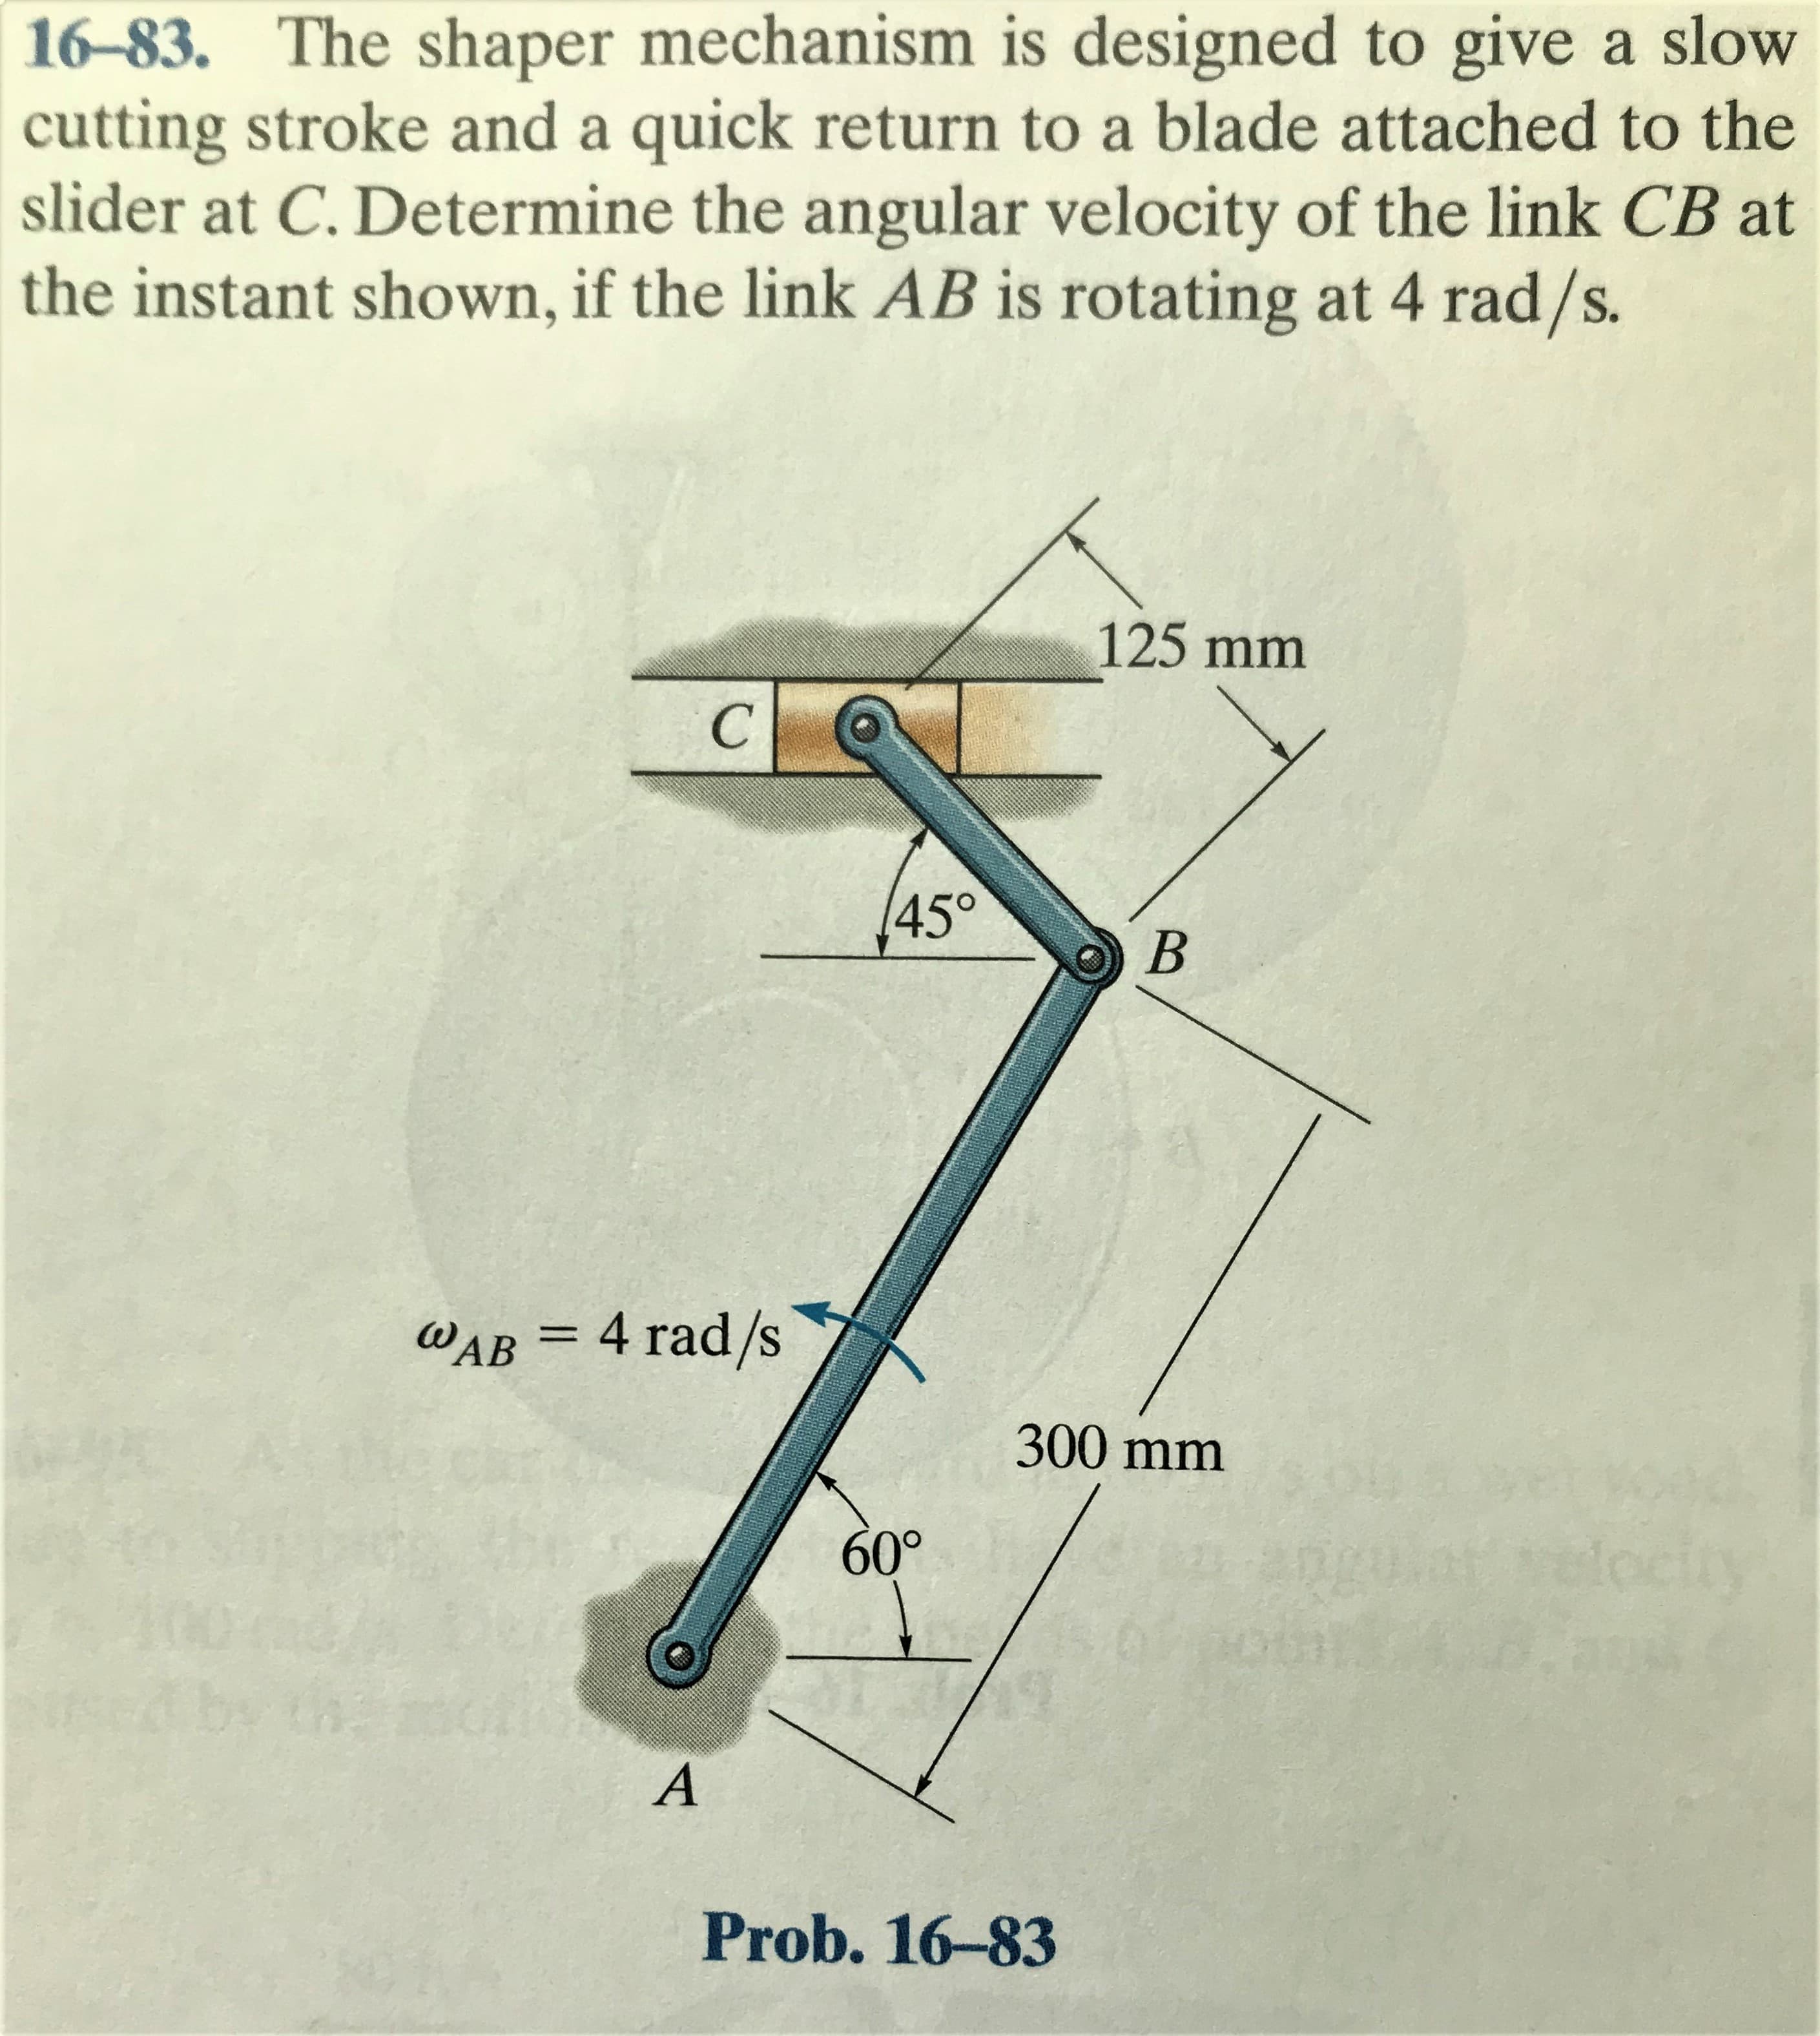 16-83. The shaper mechanism is designed to give a slow
cutting stroke and a quick return to a blade attached to the
slider at C. Determine the angular velocity of the link CB at
the instant shown, if the link AB is rotating at 4 rad/s.
125mm
145°
WAB = 4 rad/s
300 mm
60°
ARK
locio
Prob. 16-83
